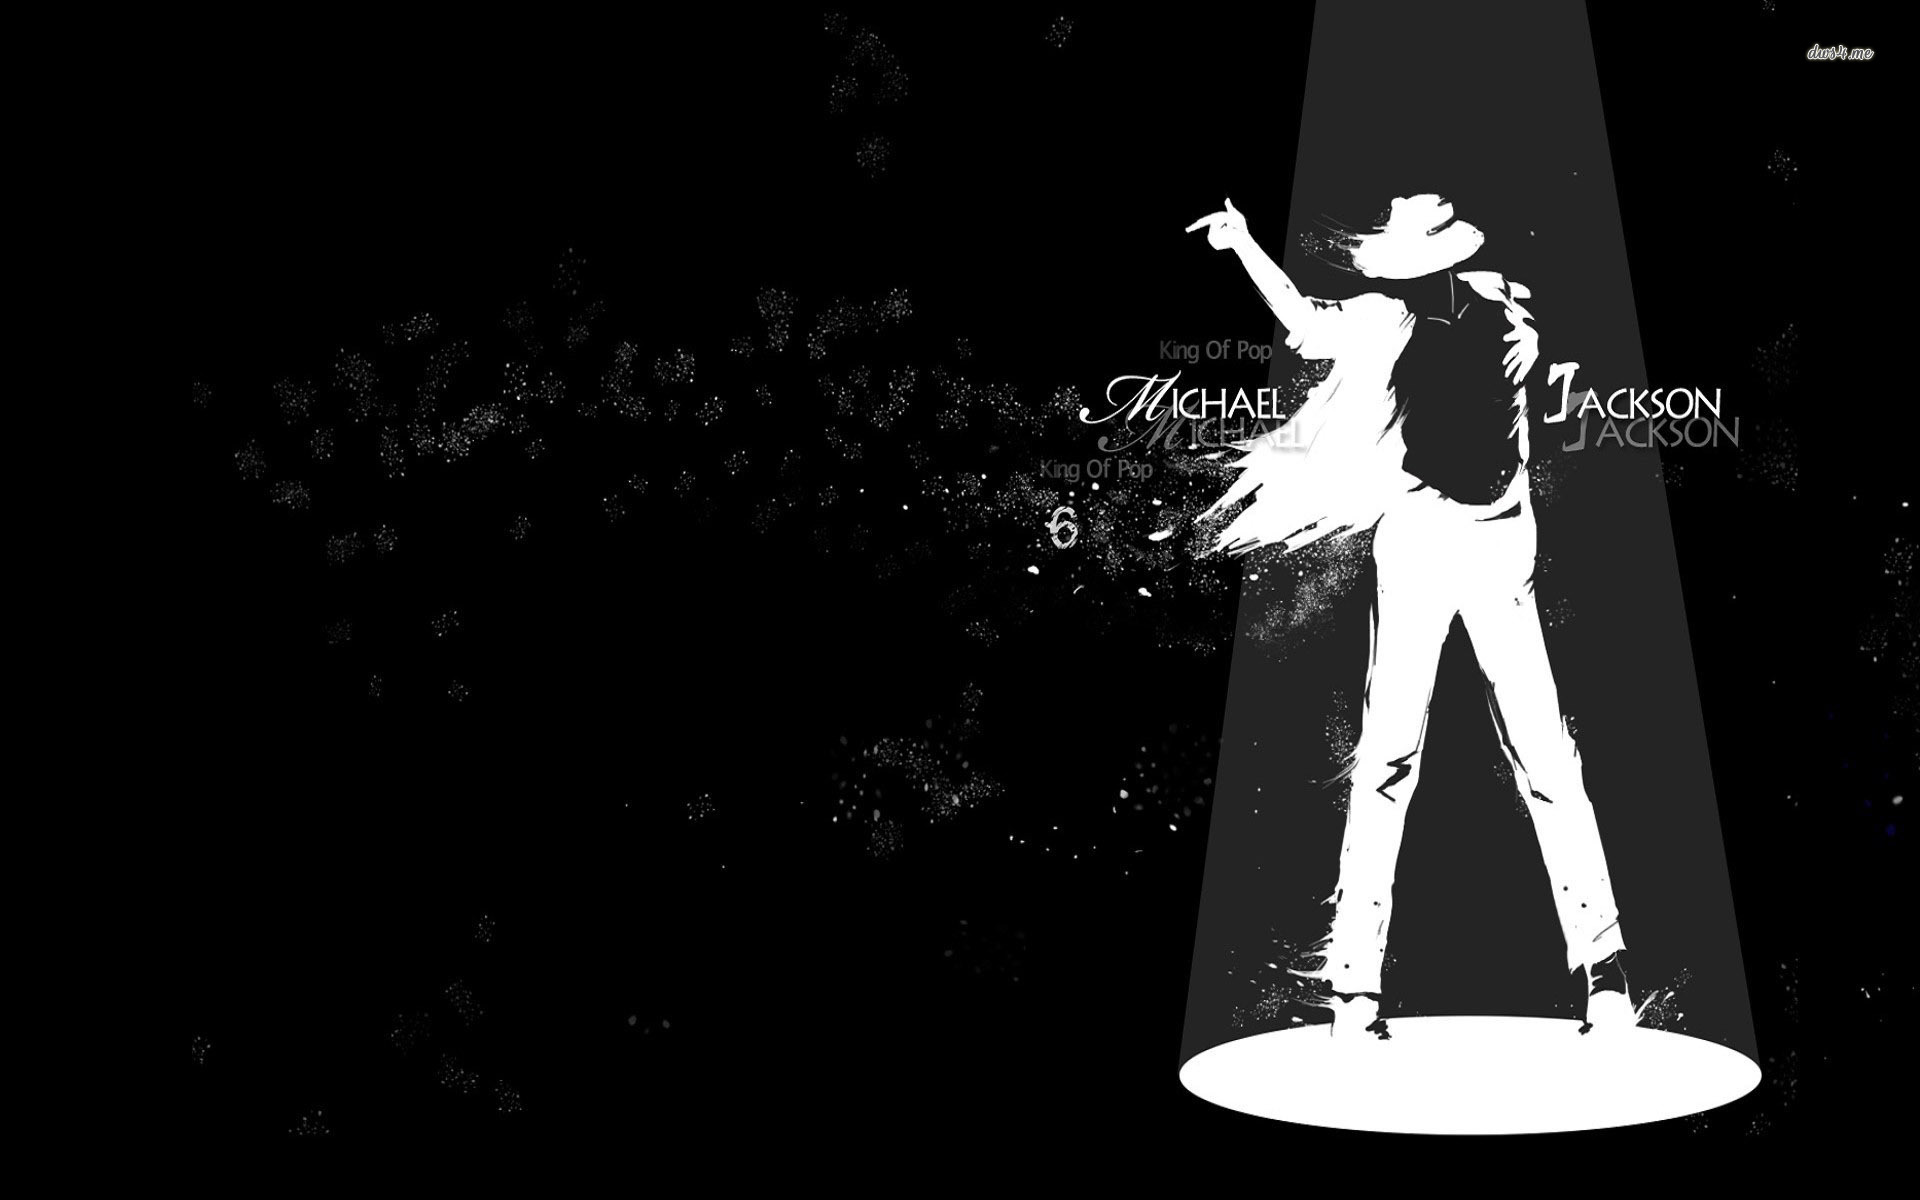 Michael Jackson Wallpapers Archives - Page 3 of 4 - Wallpaper